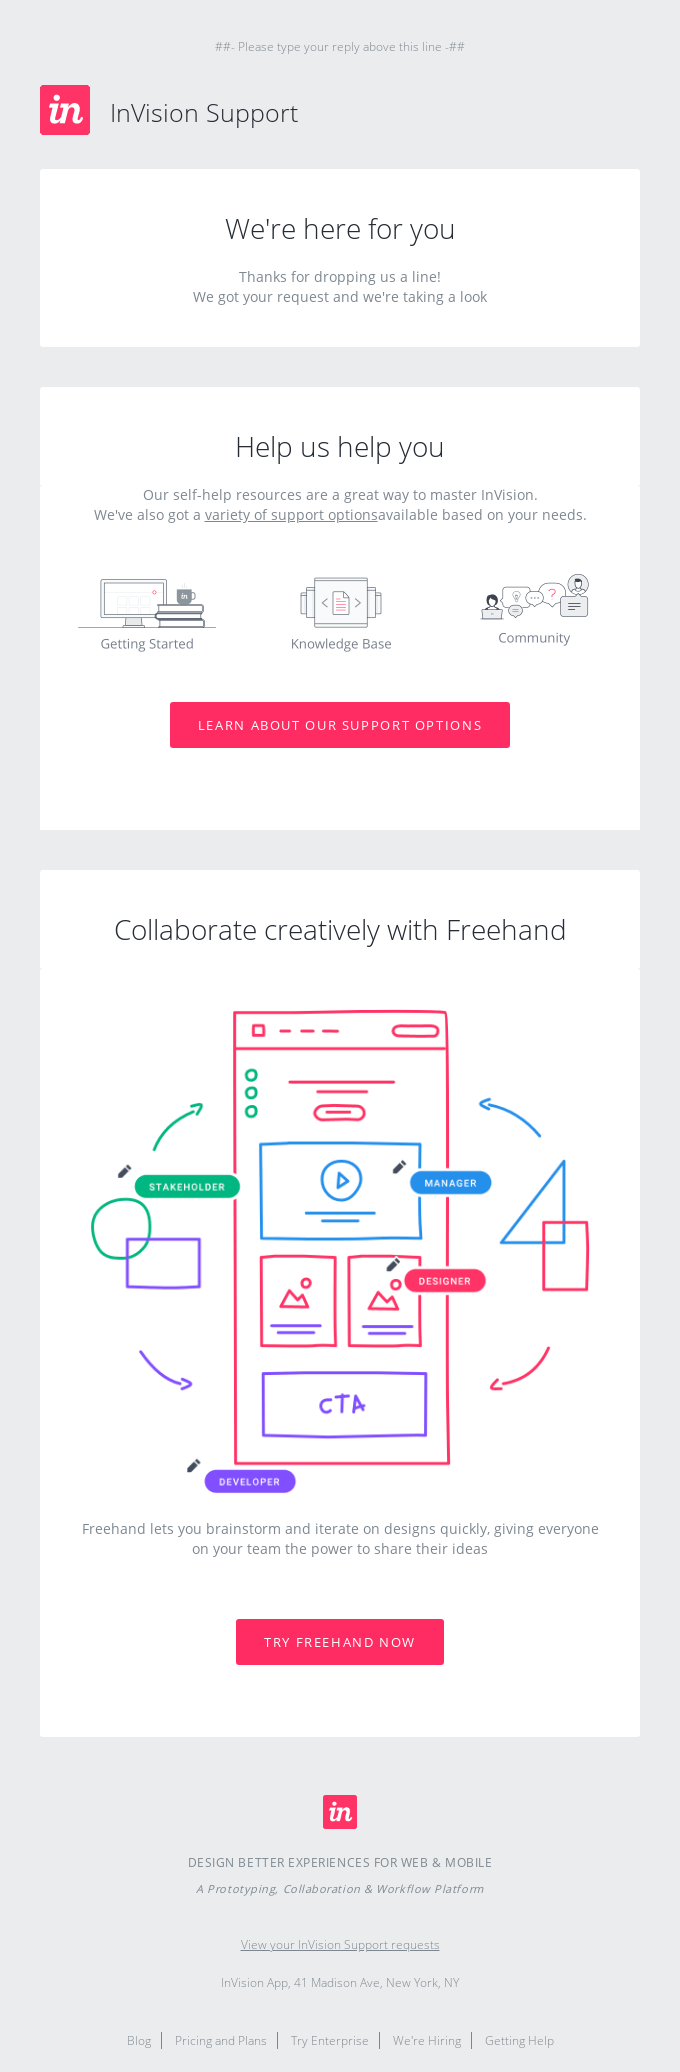 [Request received] - Invision Email Newsletter